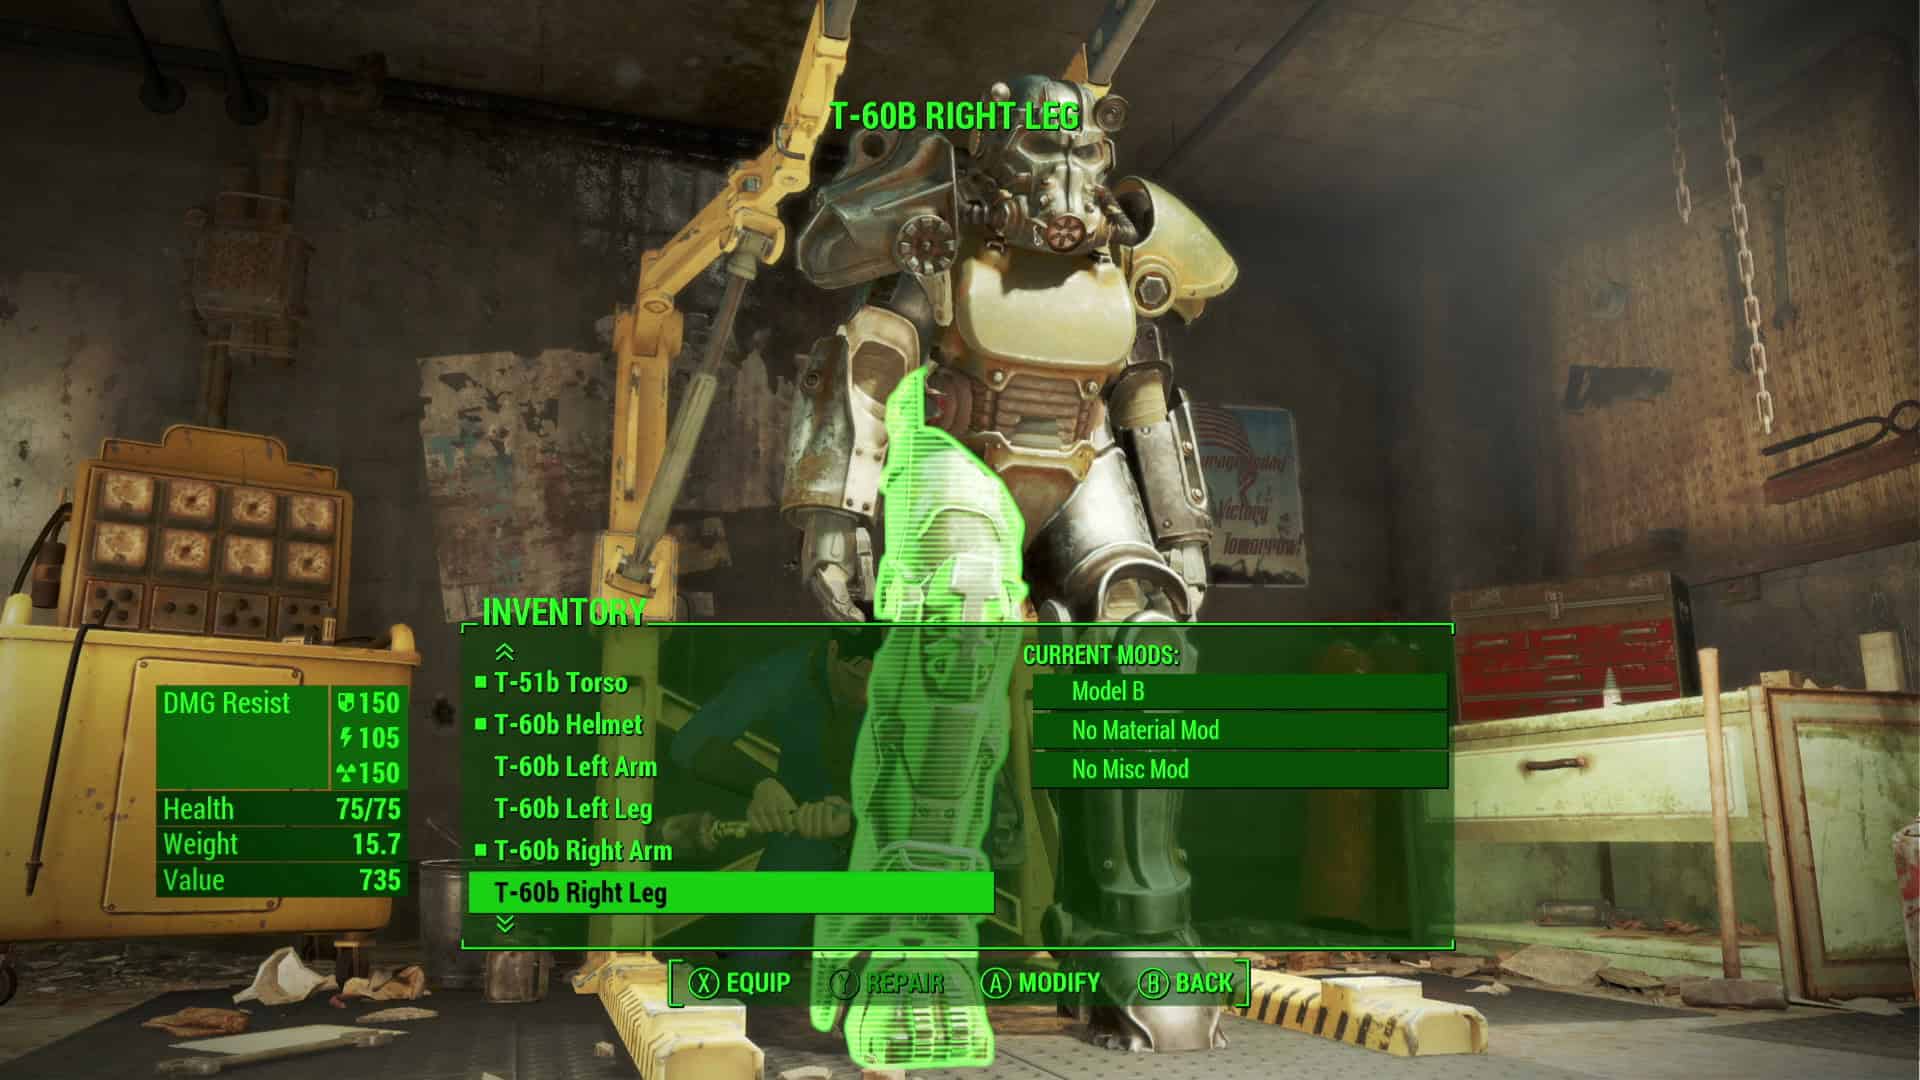 Power Armor in Fallout 4: menu for the t-60b power armor suit.